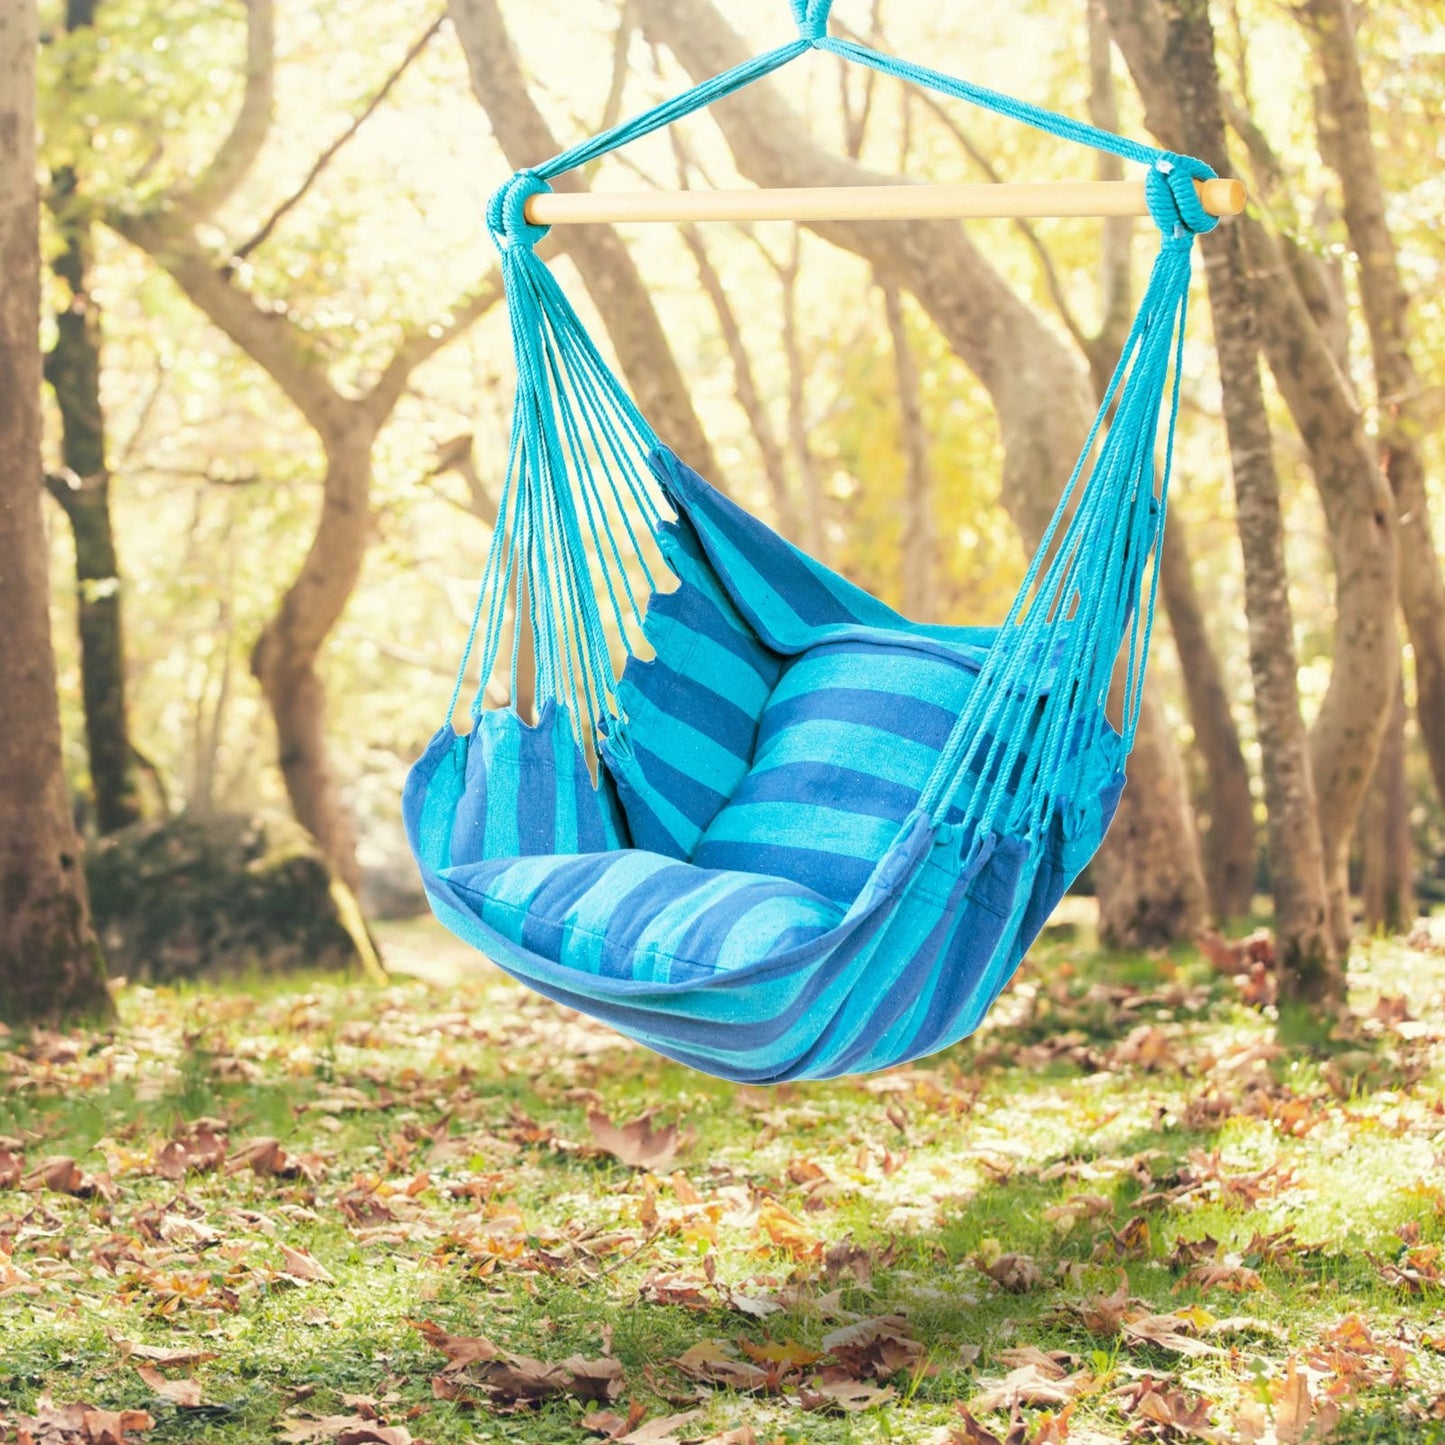 4 Color Deluxe Hammock Rope Chair Porch Yard Tree Hanging Air Swing Outdoor, Blue - Gallery Canada